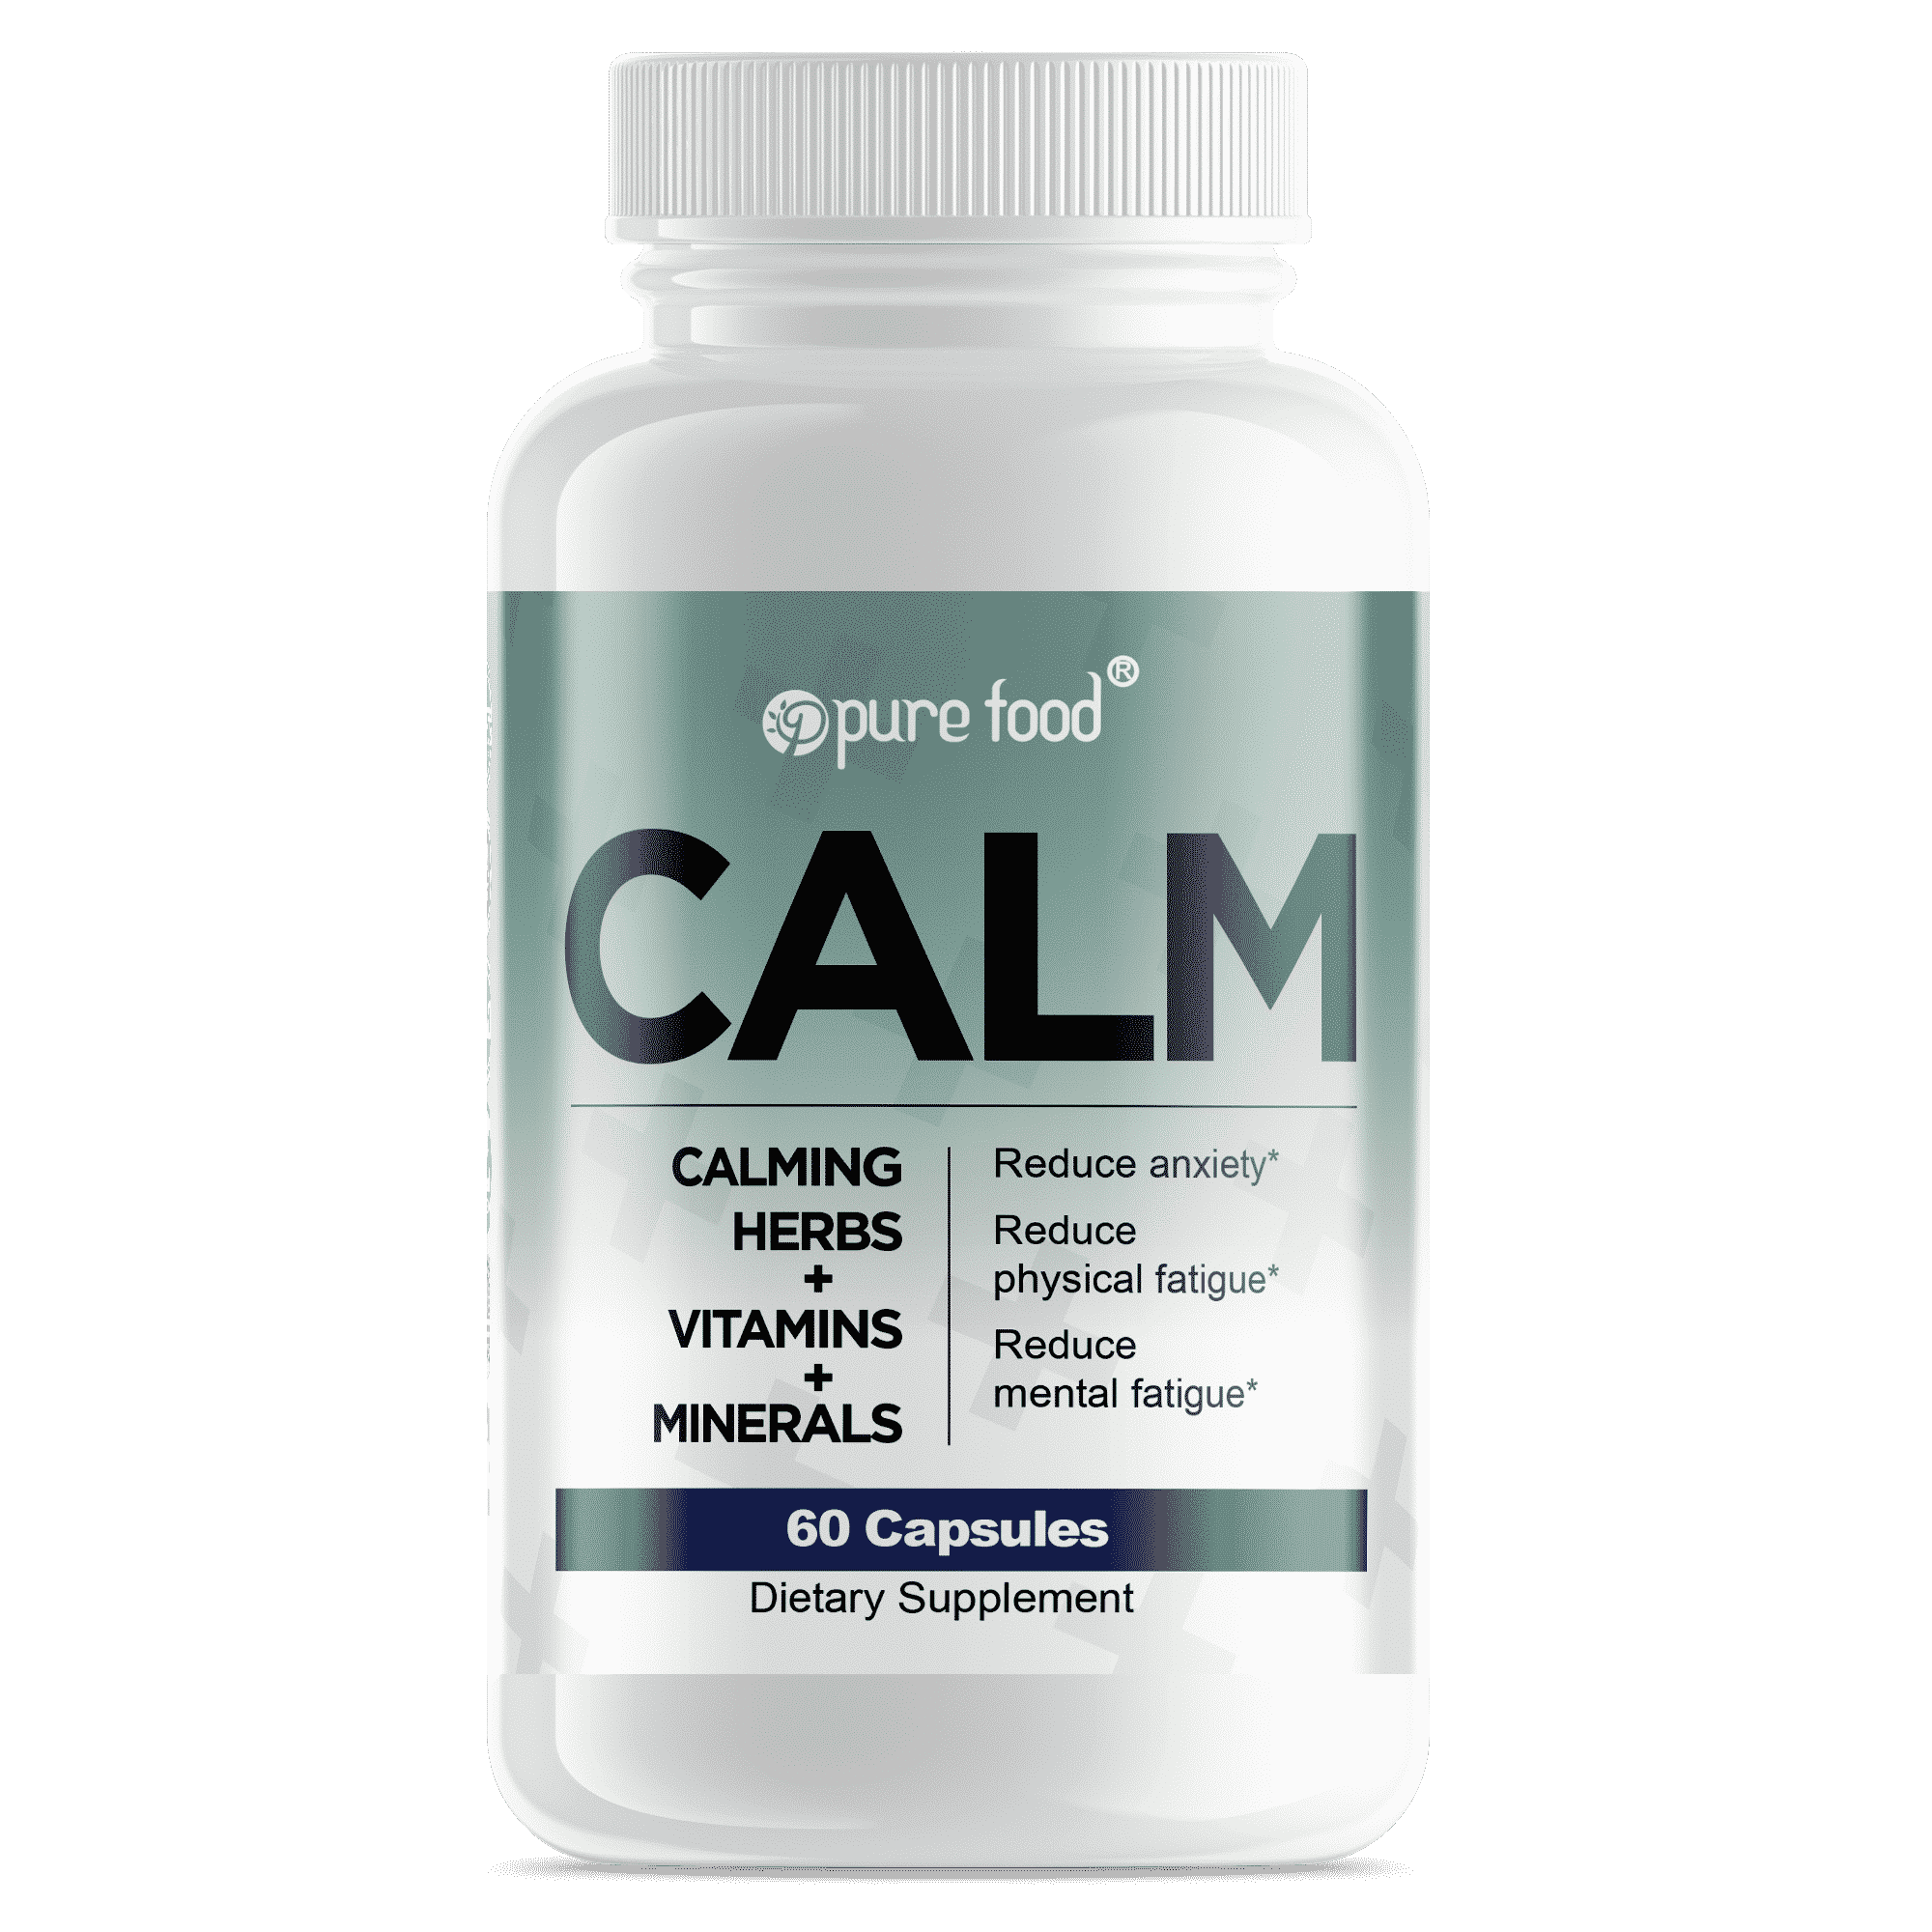 Pure Food Calm Bundle: 3 Supplements for Anxiety, Relaxation, Sleep (Magnesium Currently Out of Stock)